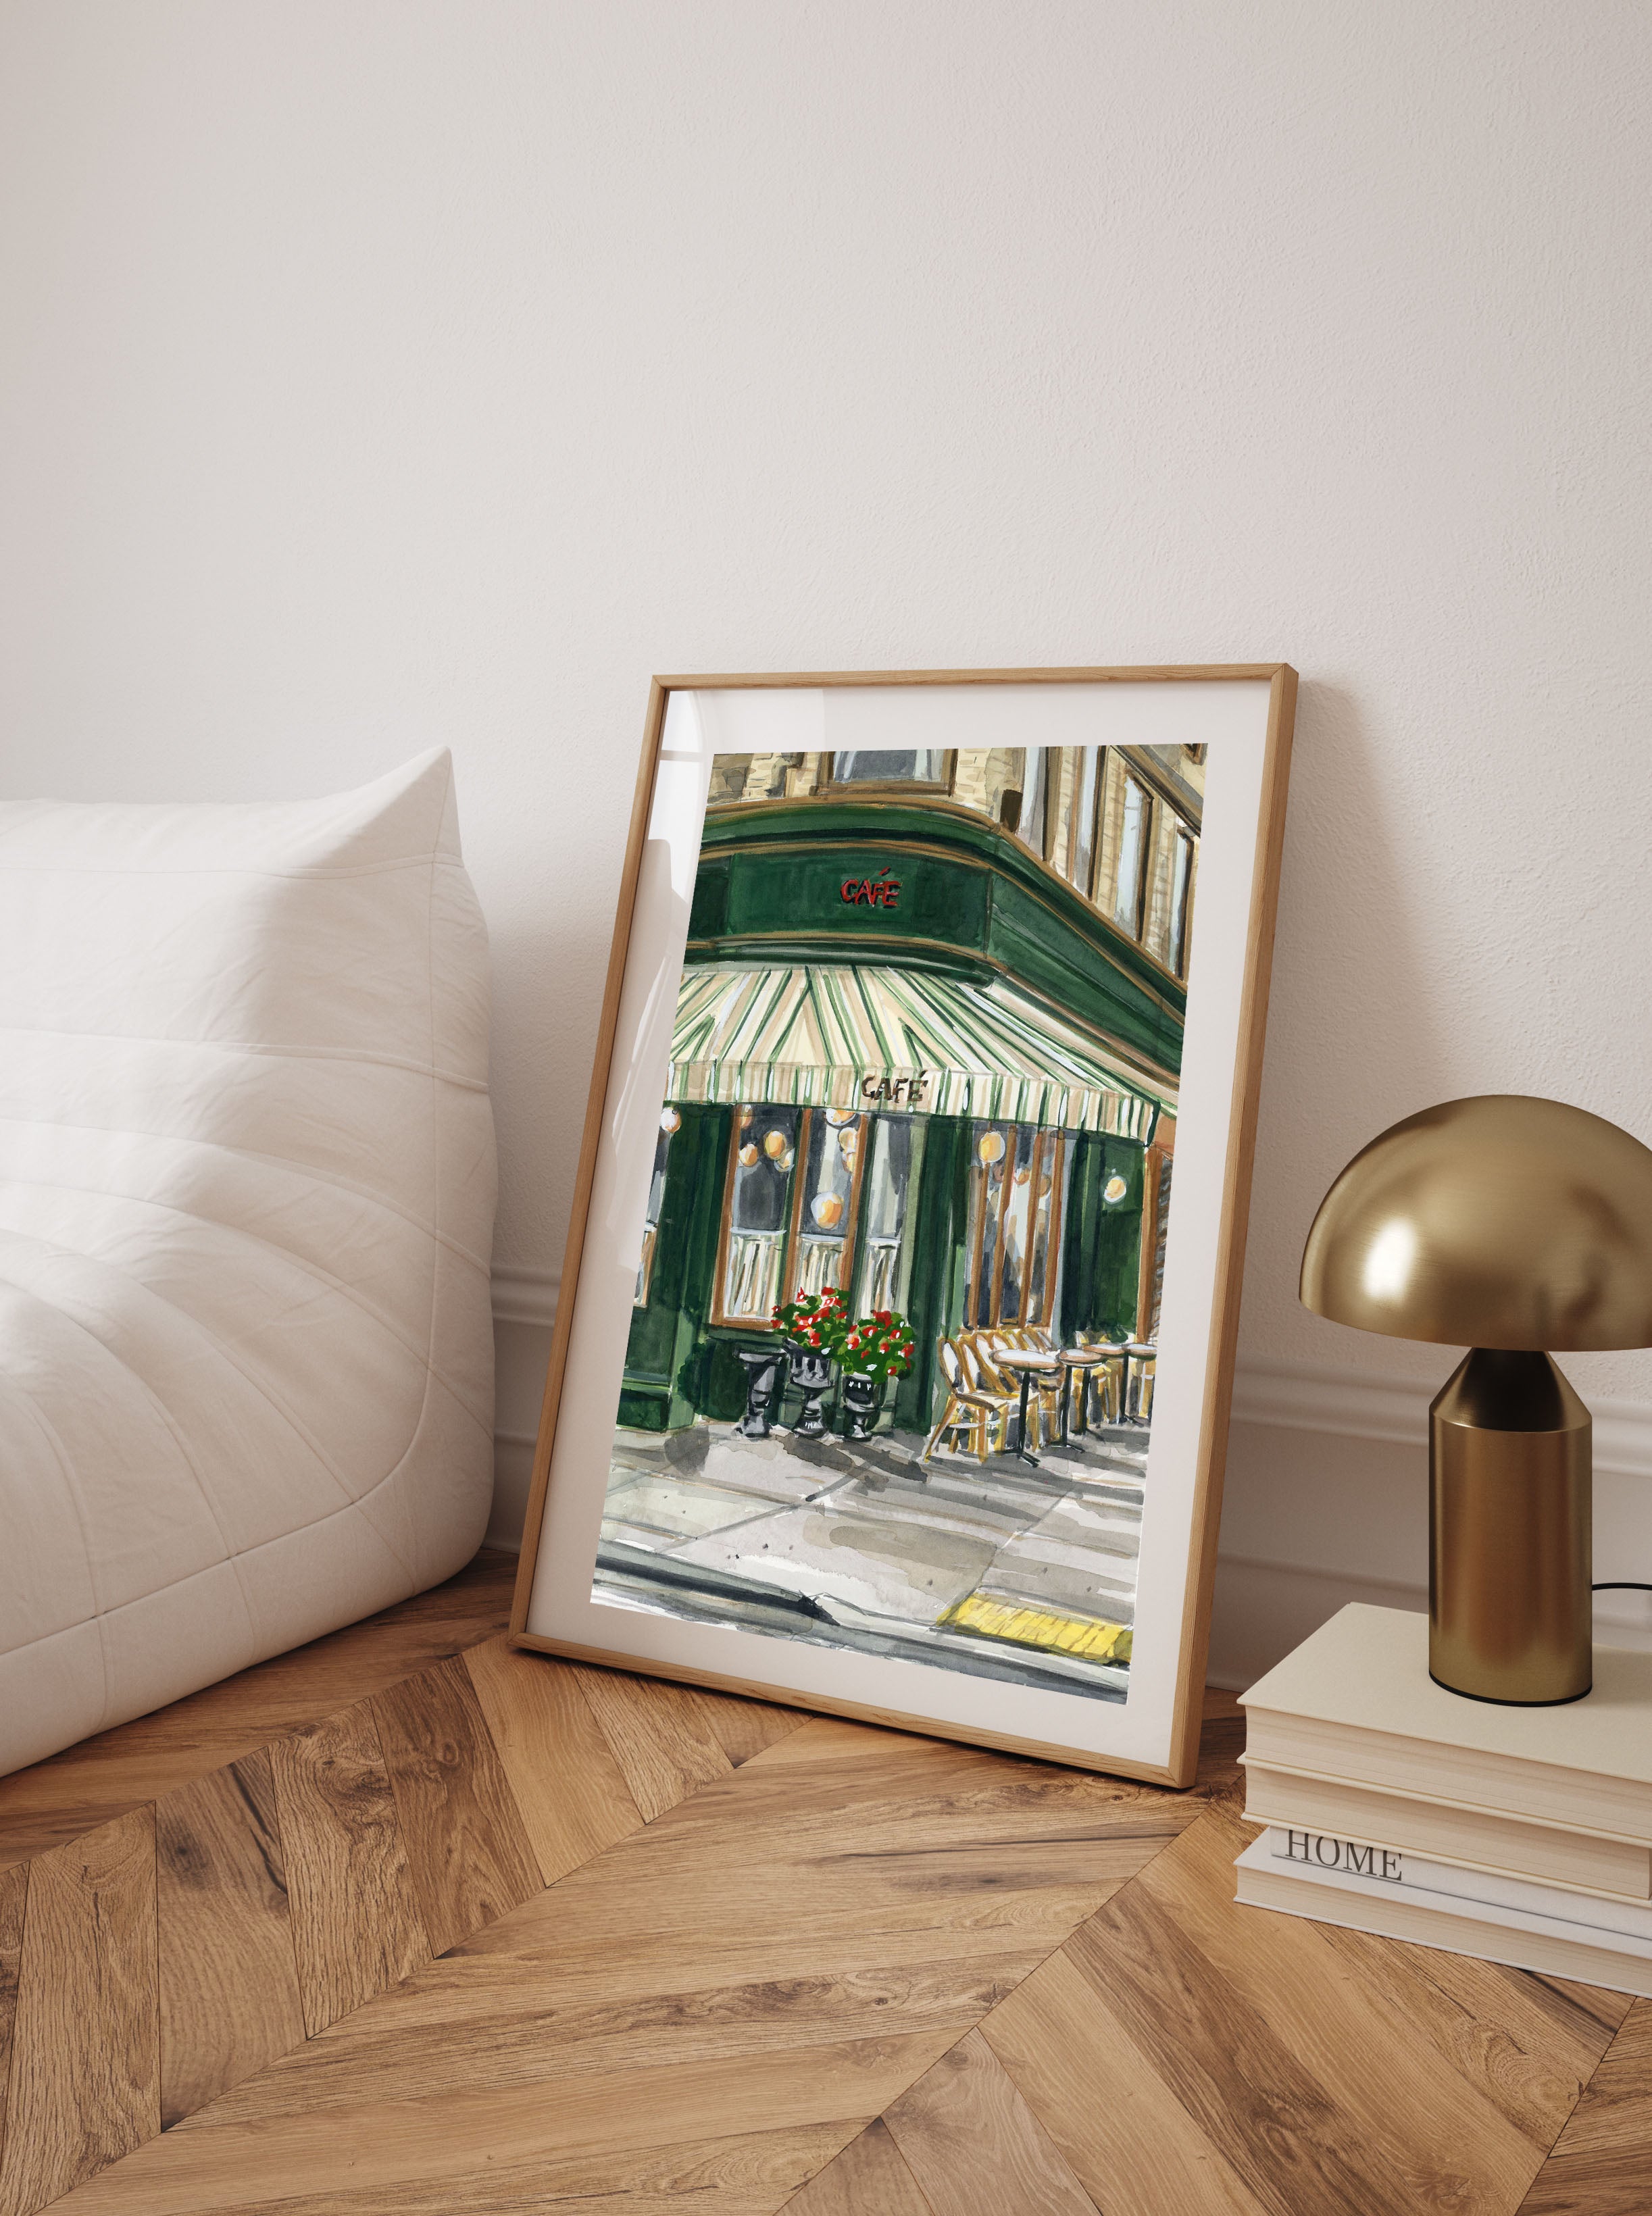 Paris Cafe Watercolour Painting. Office, Bedroom or Kitchen Wall Art and Home Decor.